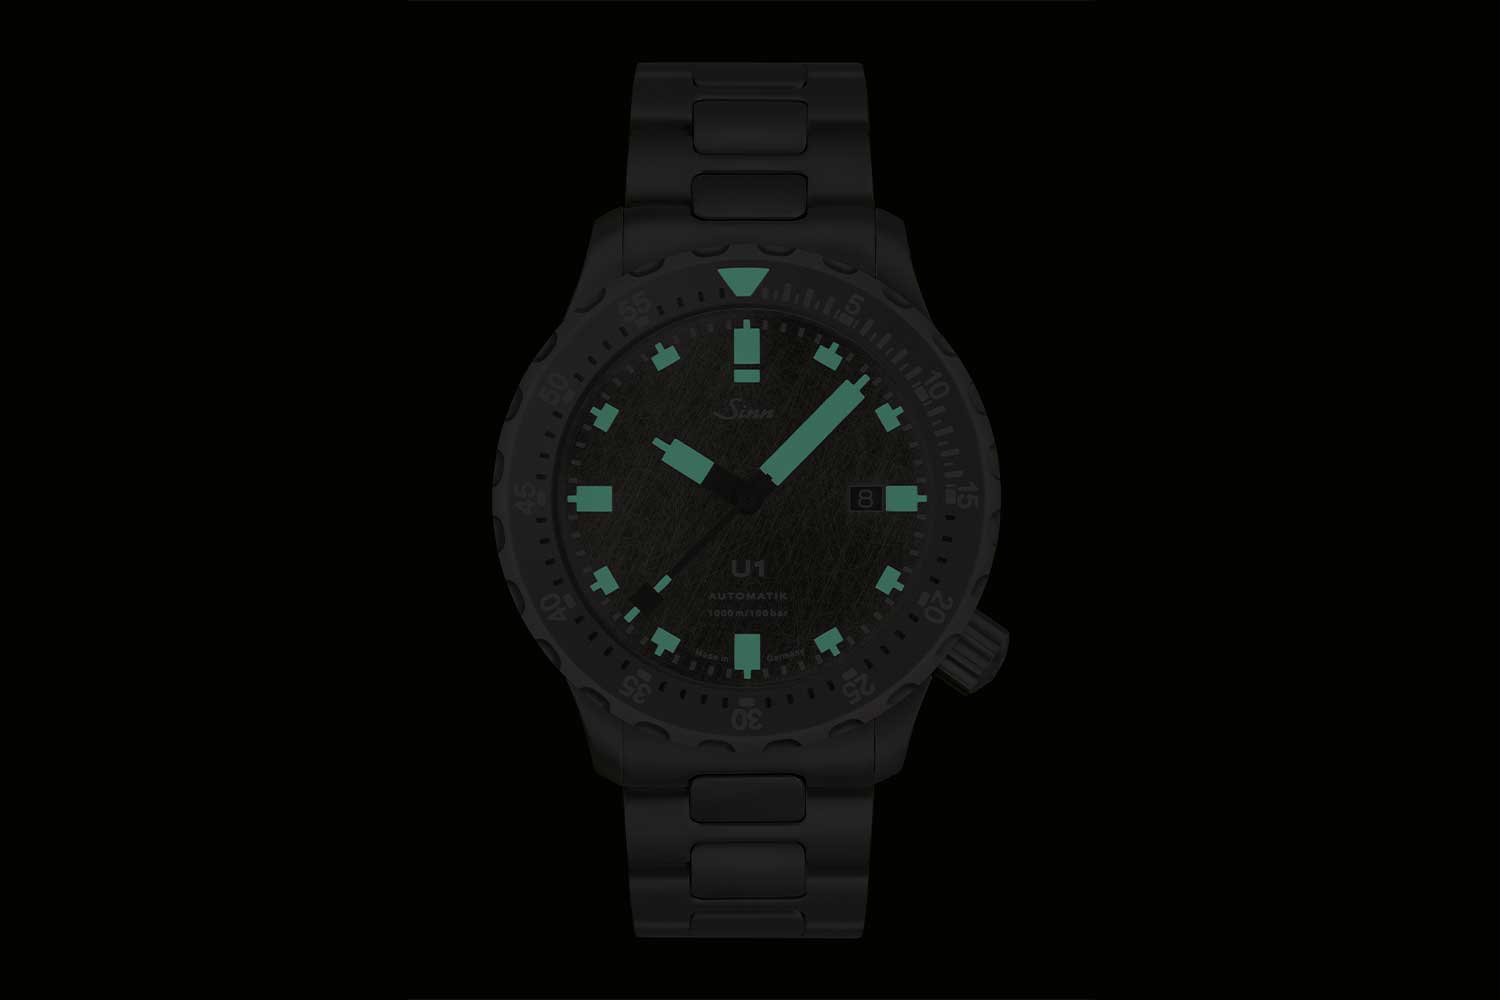 Lume action on the limited edition Sinn U1 DS